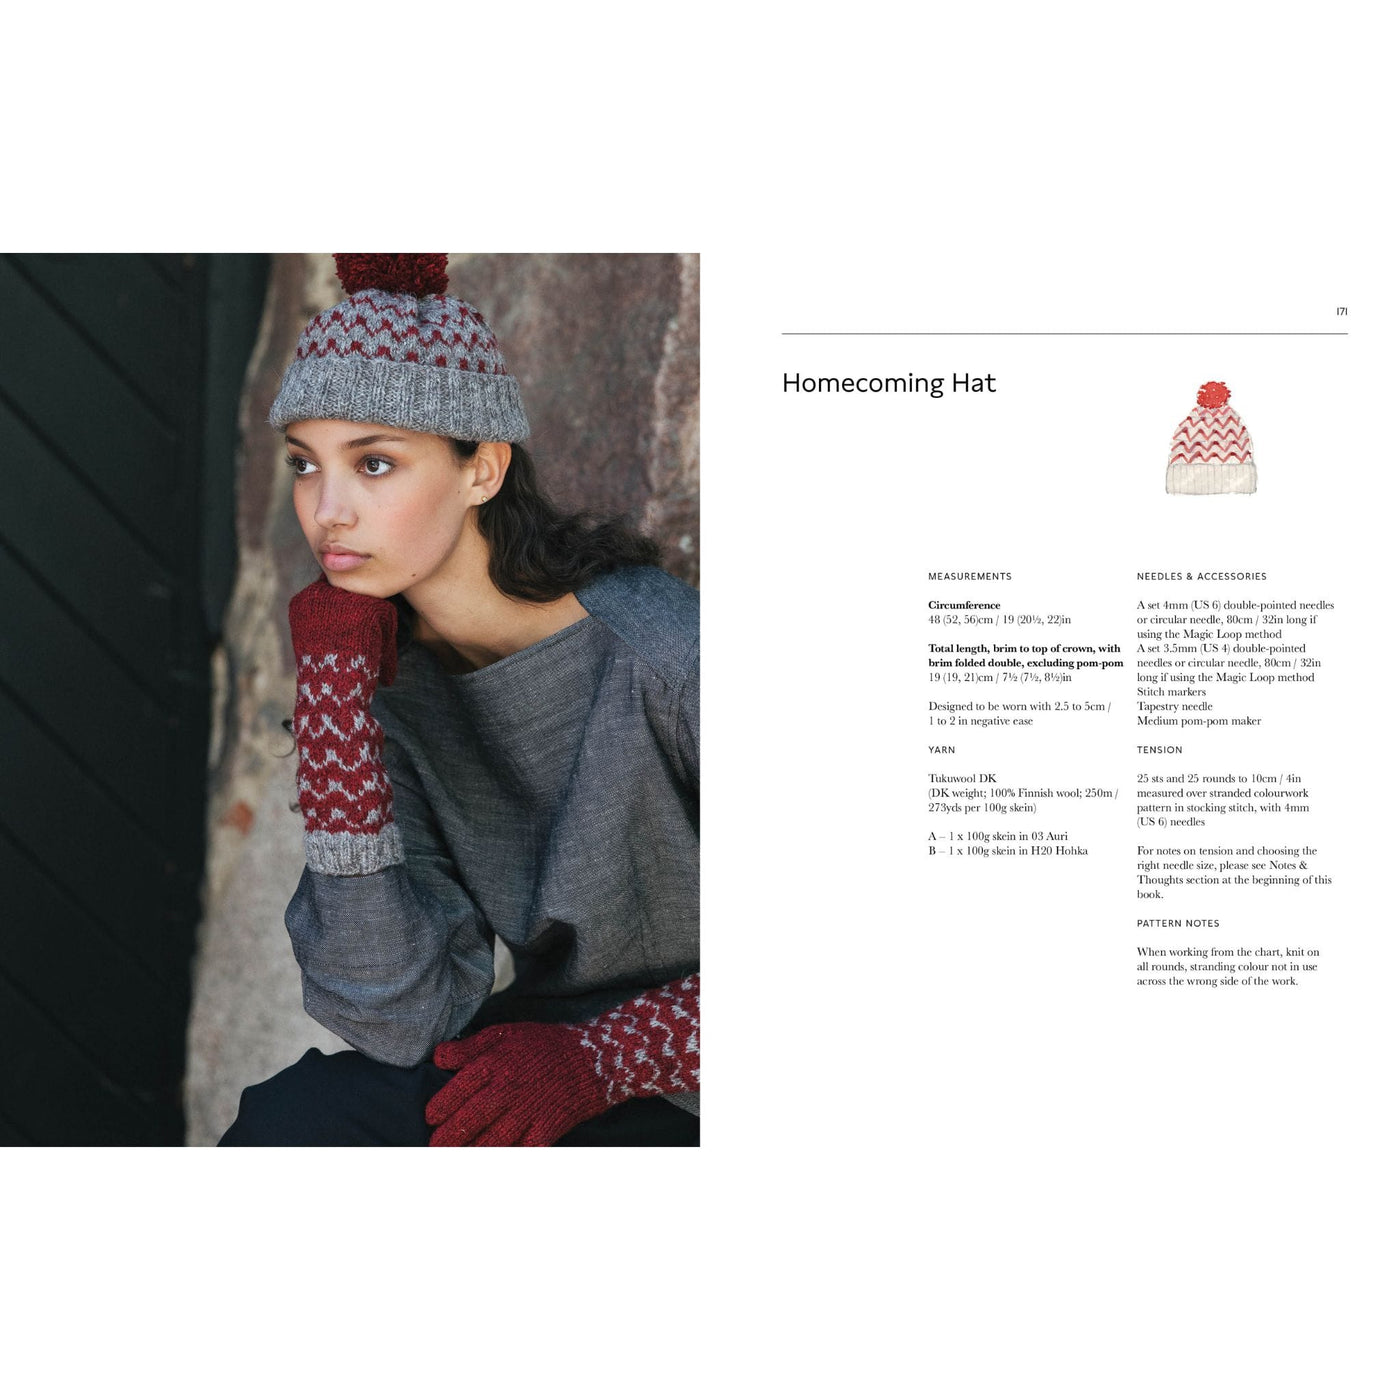 Page from The Knitted Fabric by Dee Hardwicke, showing the Homecoming Hat with a photo and text